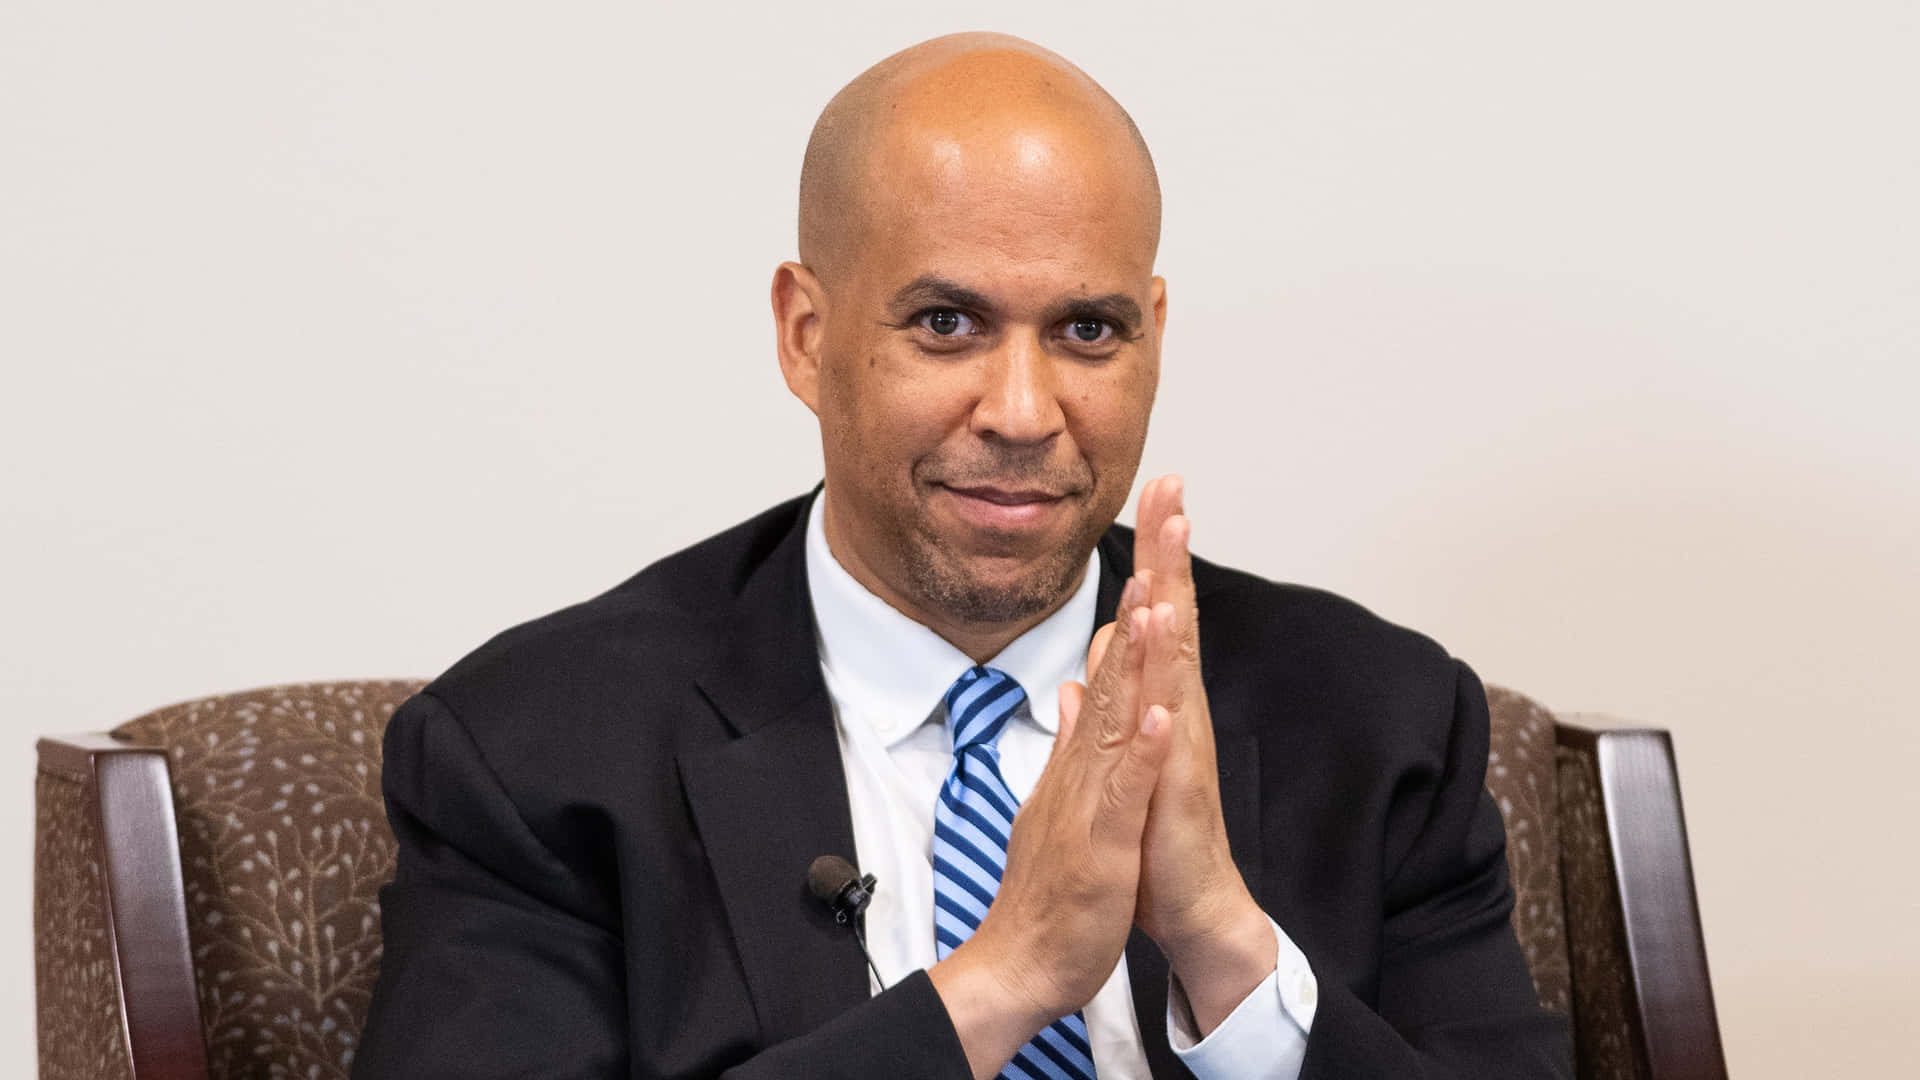 Cory Booker Clapping Wallpaper